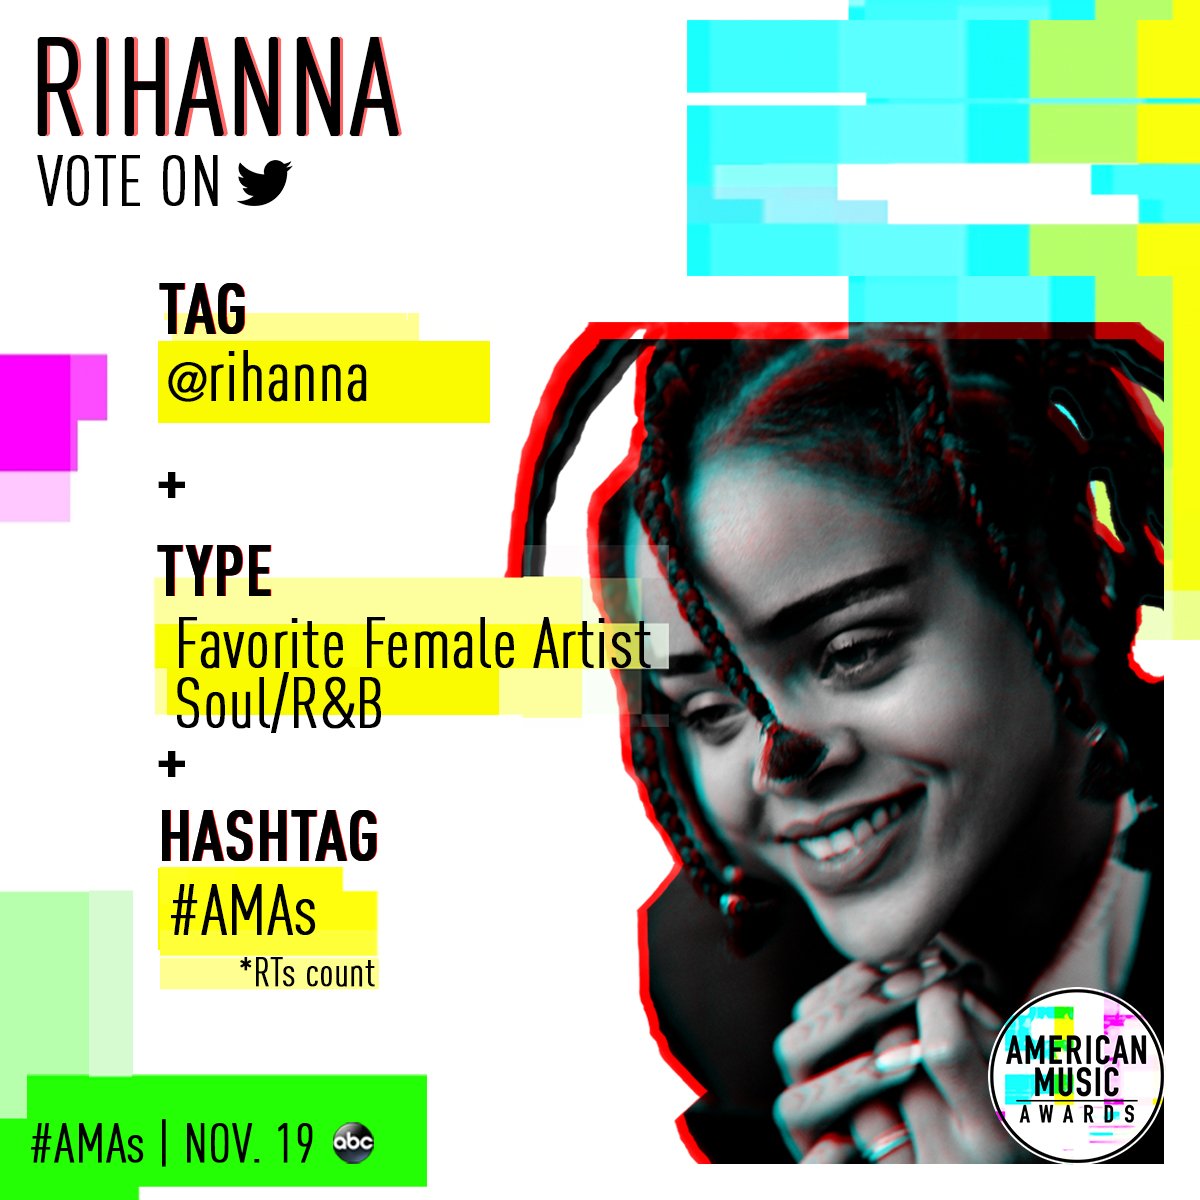 RT @AMAs: .@rihanna could win her seventh award for Favorite Female Artist Soul/R&B at the #AMAs. ????  RT to VOTE! https://t.co/J44adHdTMQ